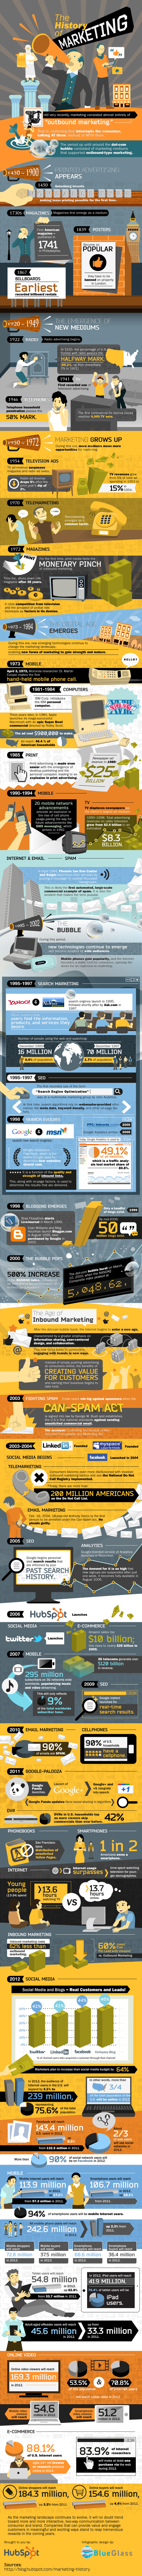 History of Marketing Infographic